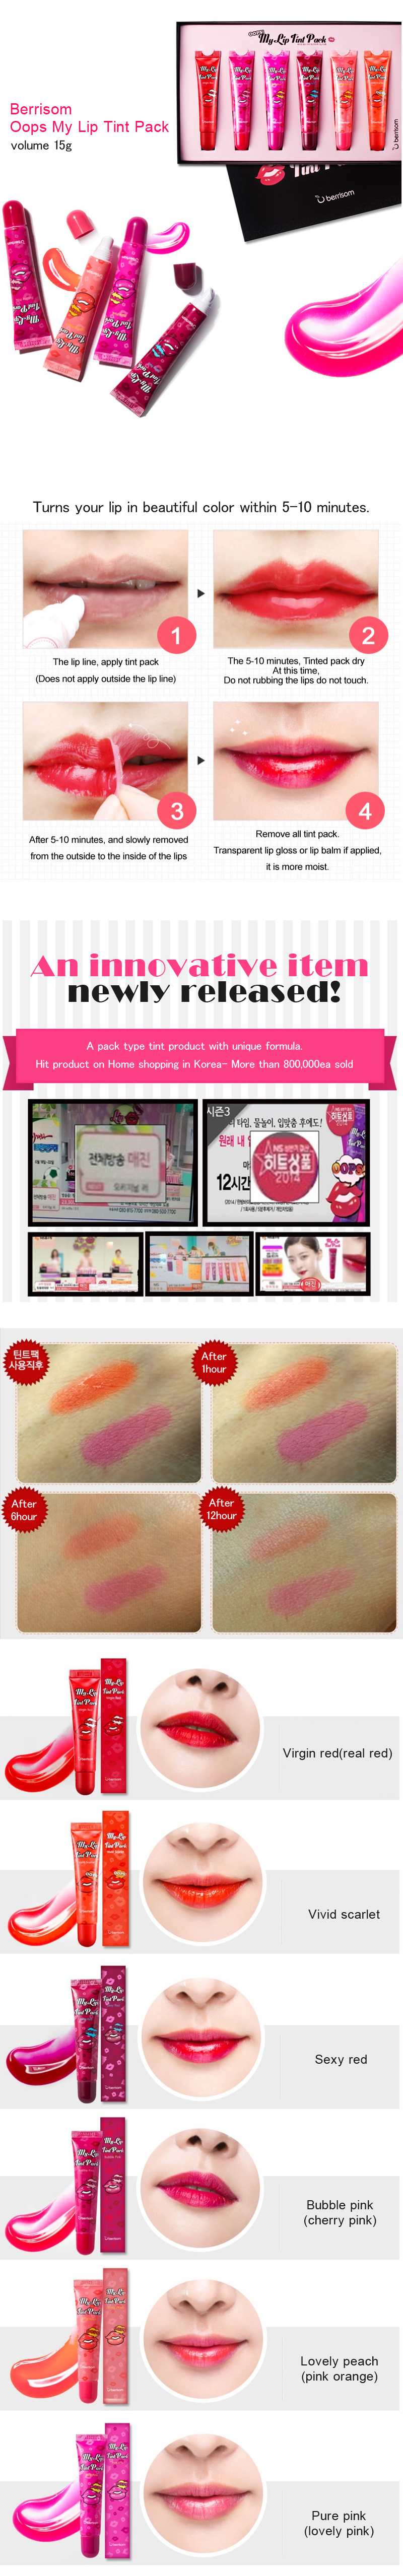 [Berrisom] Oops! My Lip Tint Pack Set 15g Each (6 Different Kinds) 12 Hours Lasting